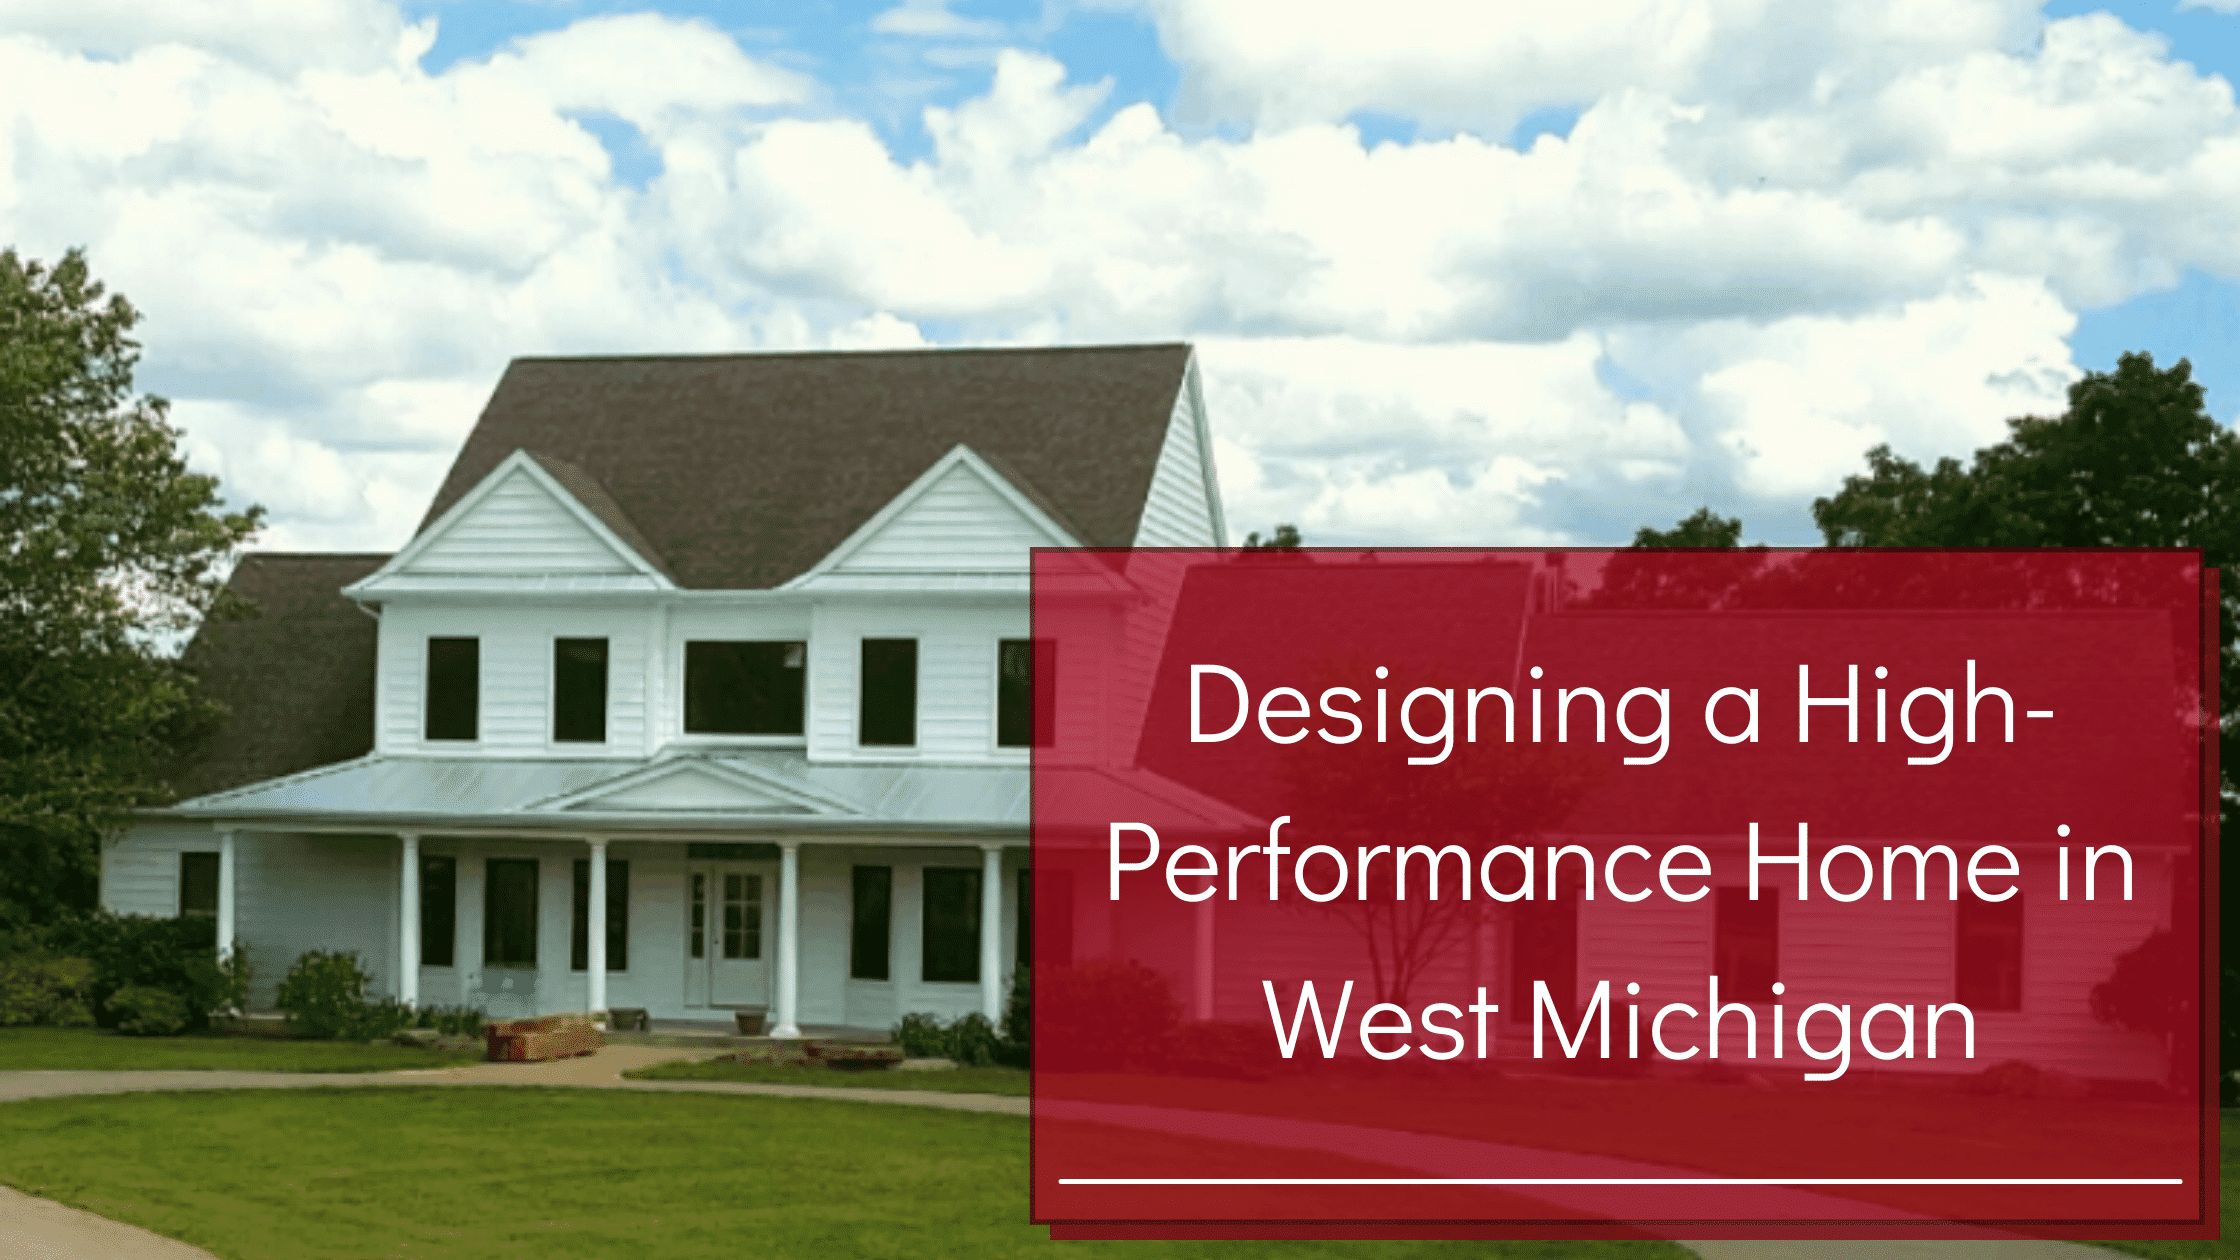 Designing a High-Performance Home in West Michigan